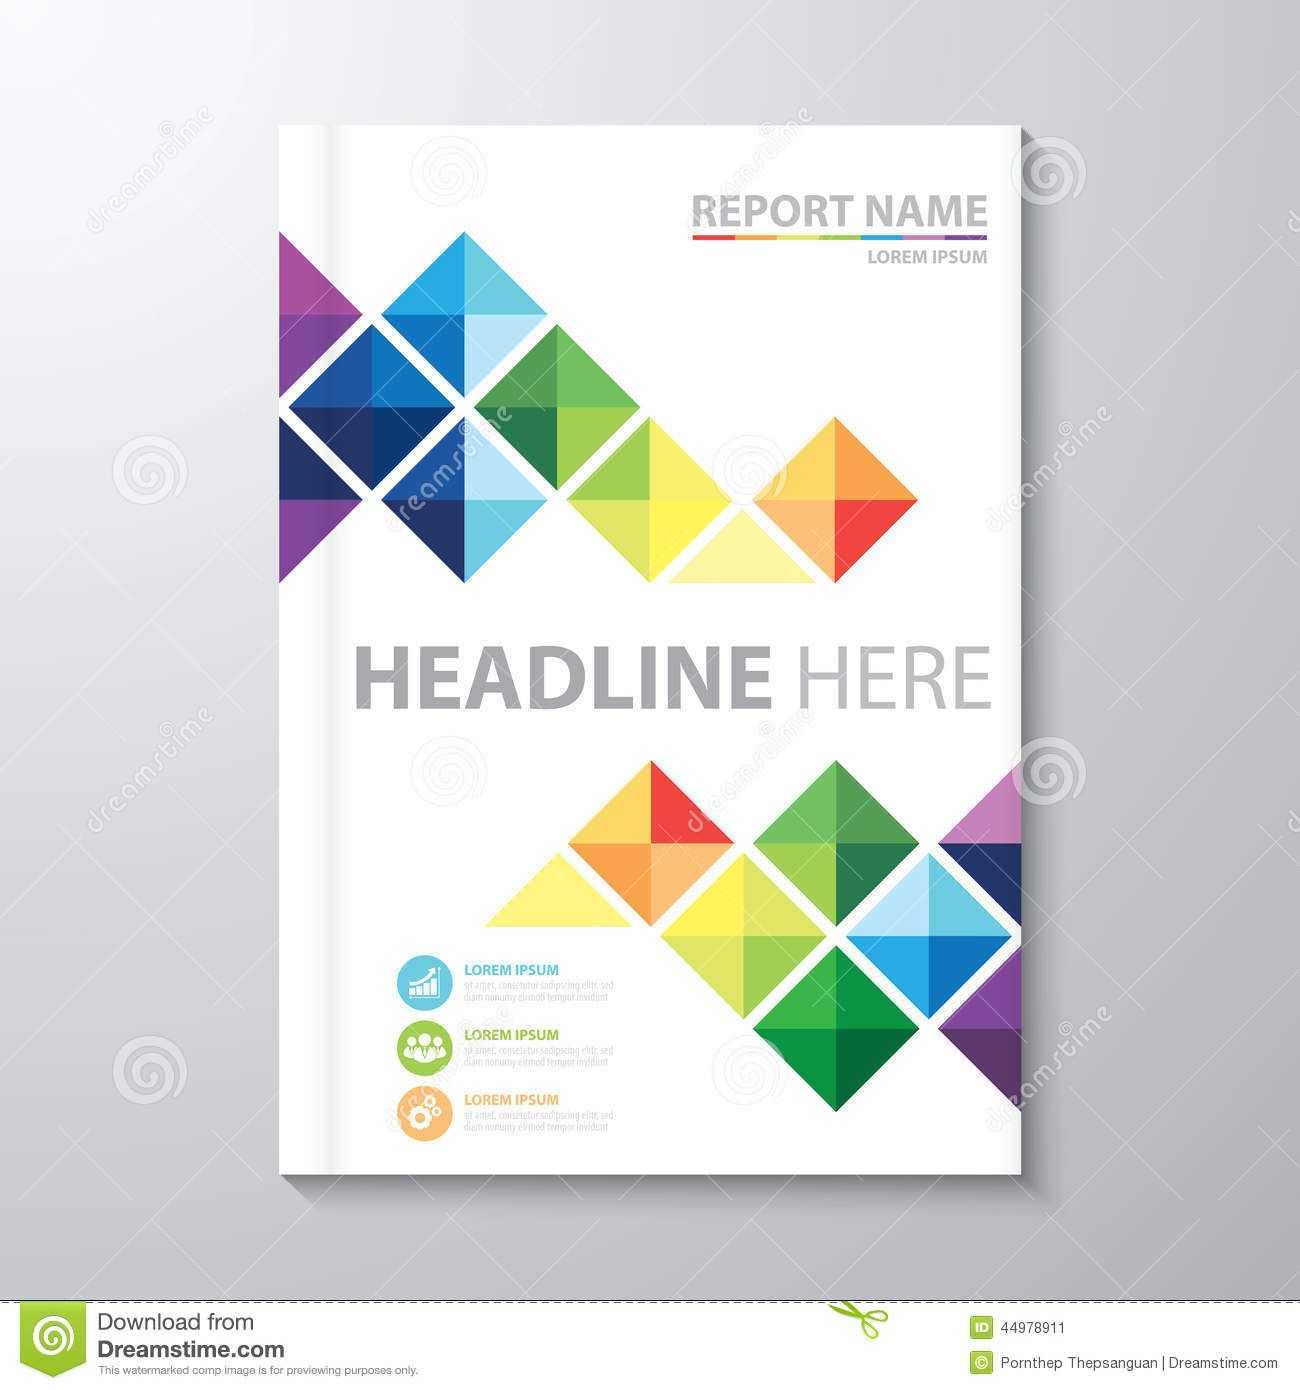 008 Word Cover Pages Templates Template Ideas Magnificent For Report Cover Page Template Word